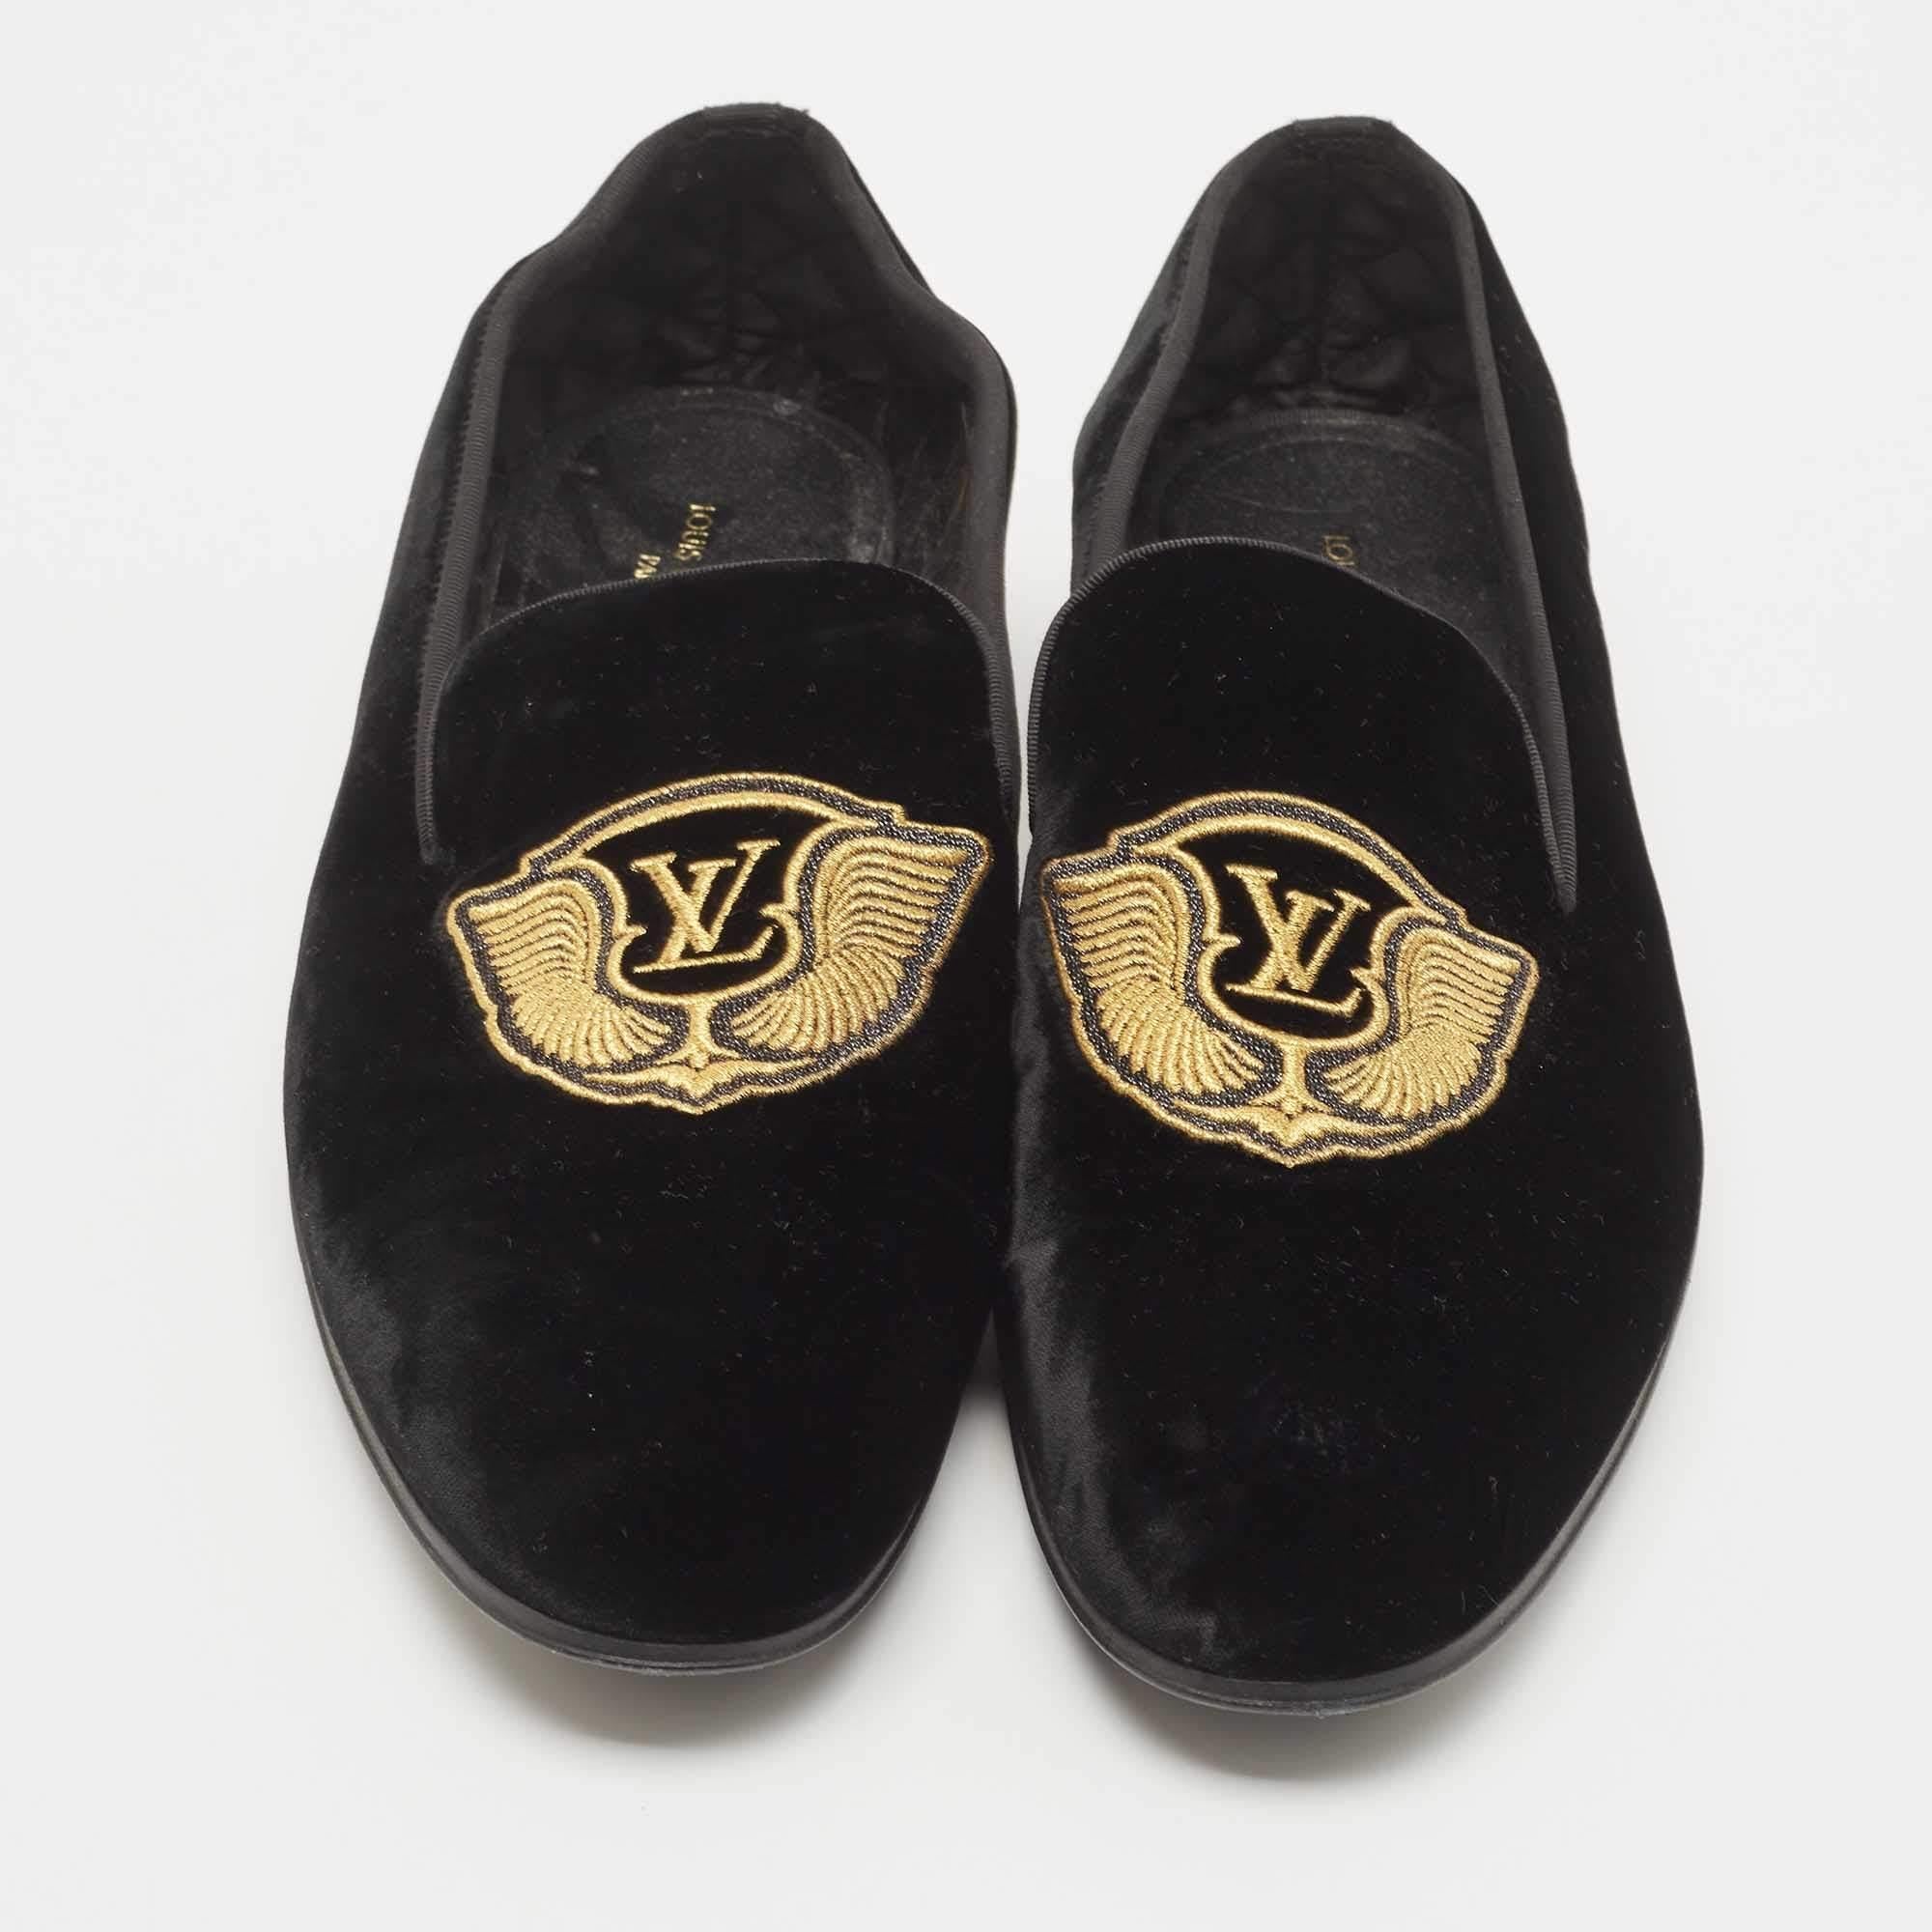 This comfortable and stylish pair by Louis Vuitton is just what you need to grace your look. Crafted with black check velvet, this pair comes adorned with tassels on the vamps. These smoking slippers feature a sturdy leather sole, that lets you